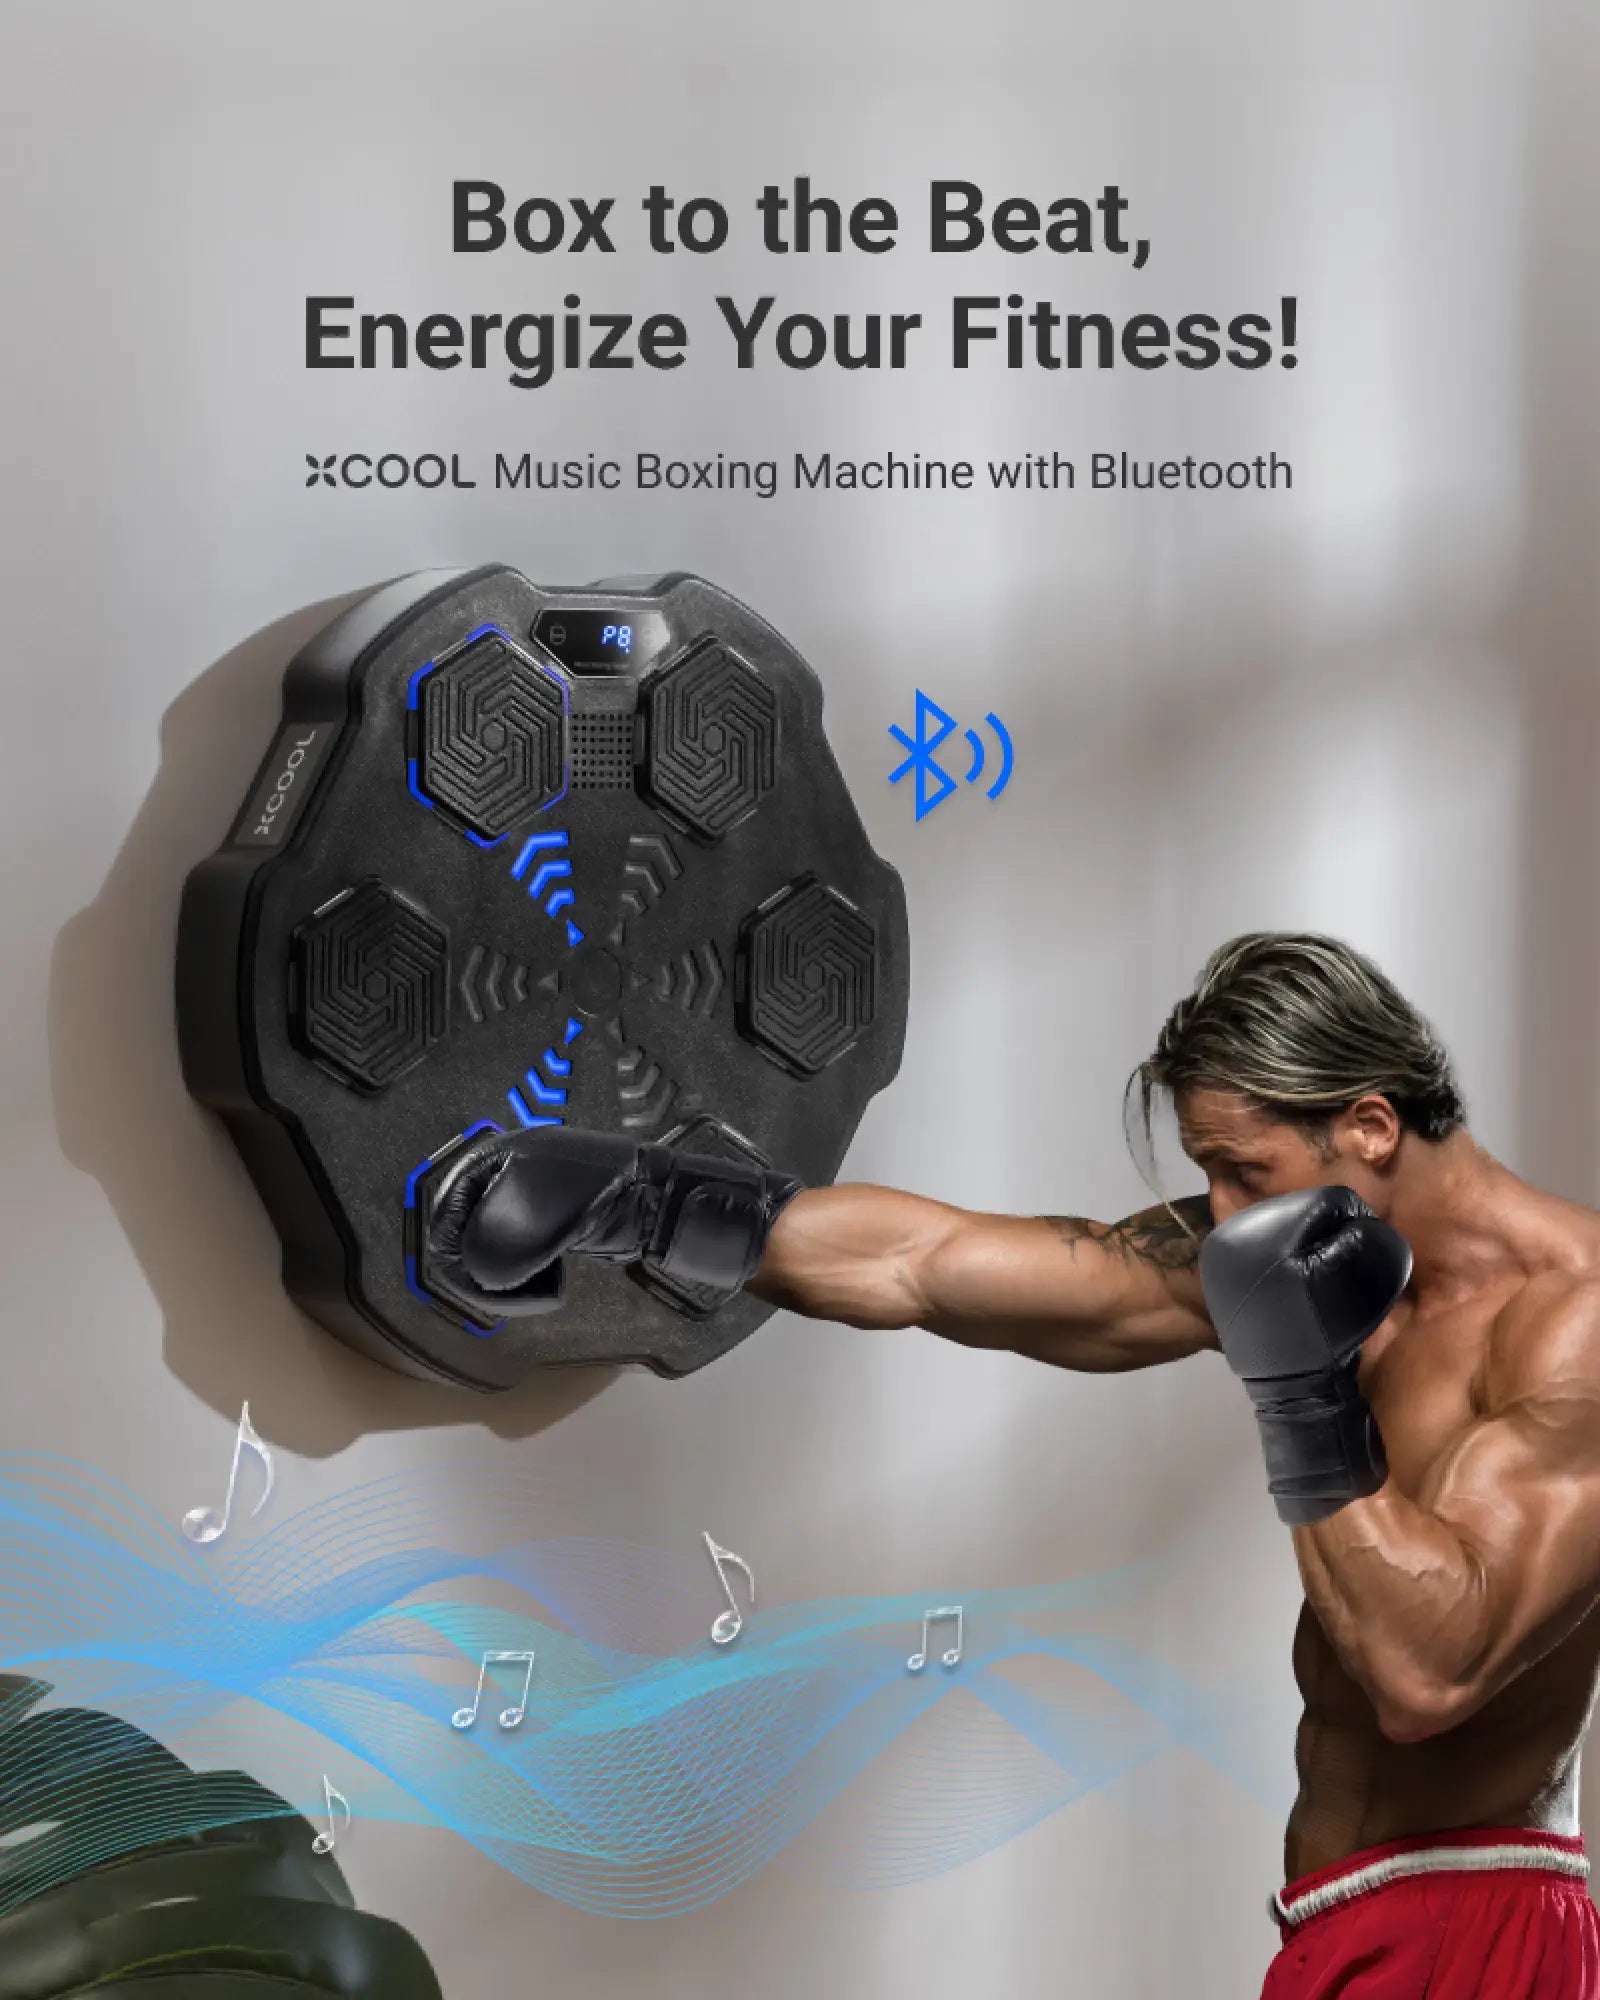 music-boxing-machine-with-bluetooth-description1